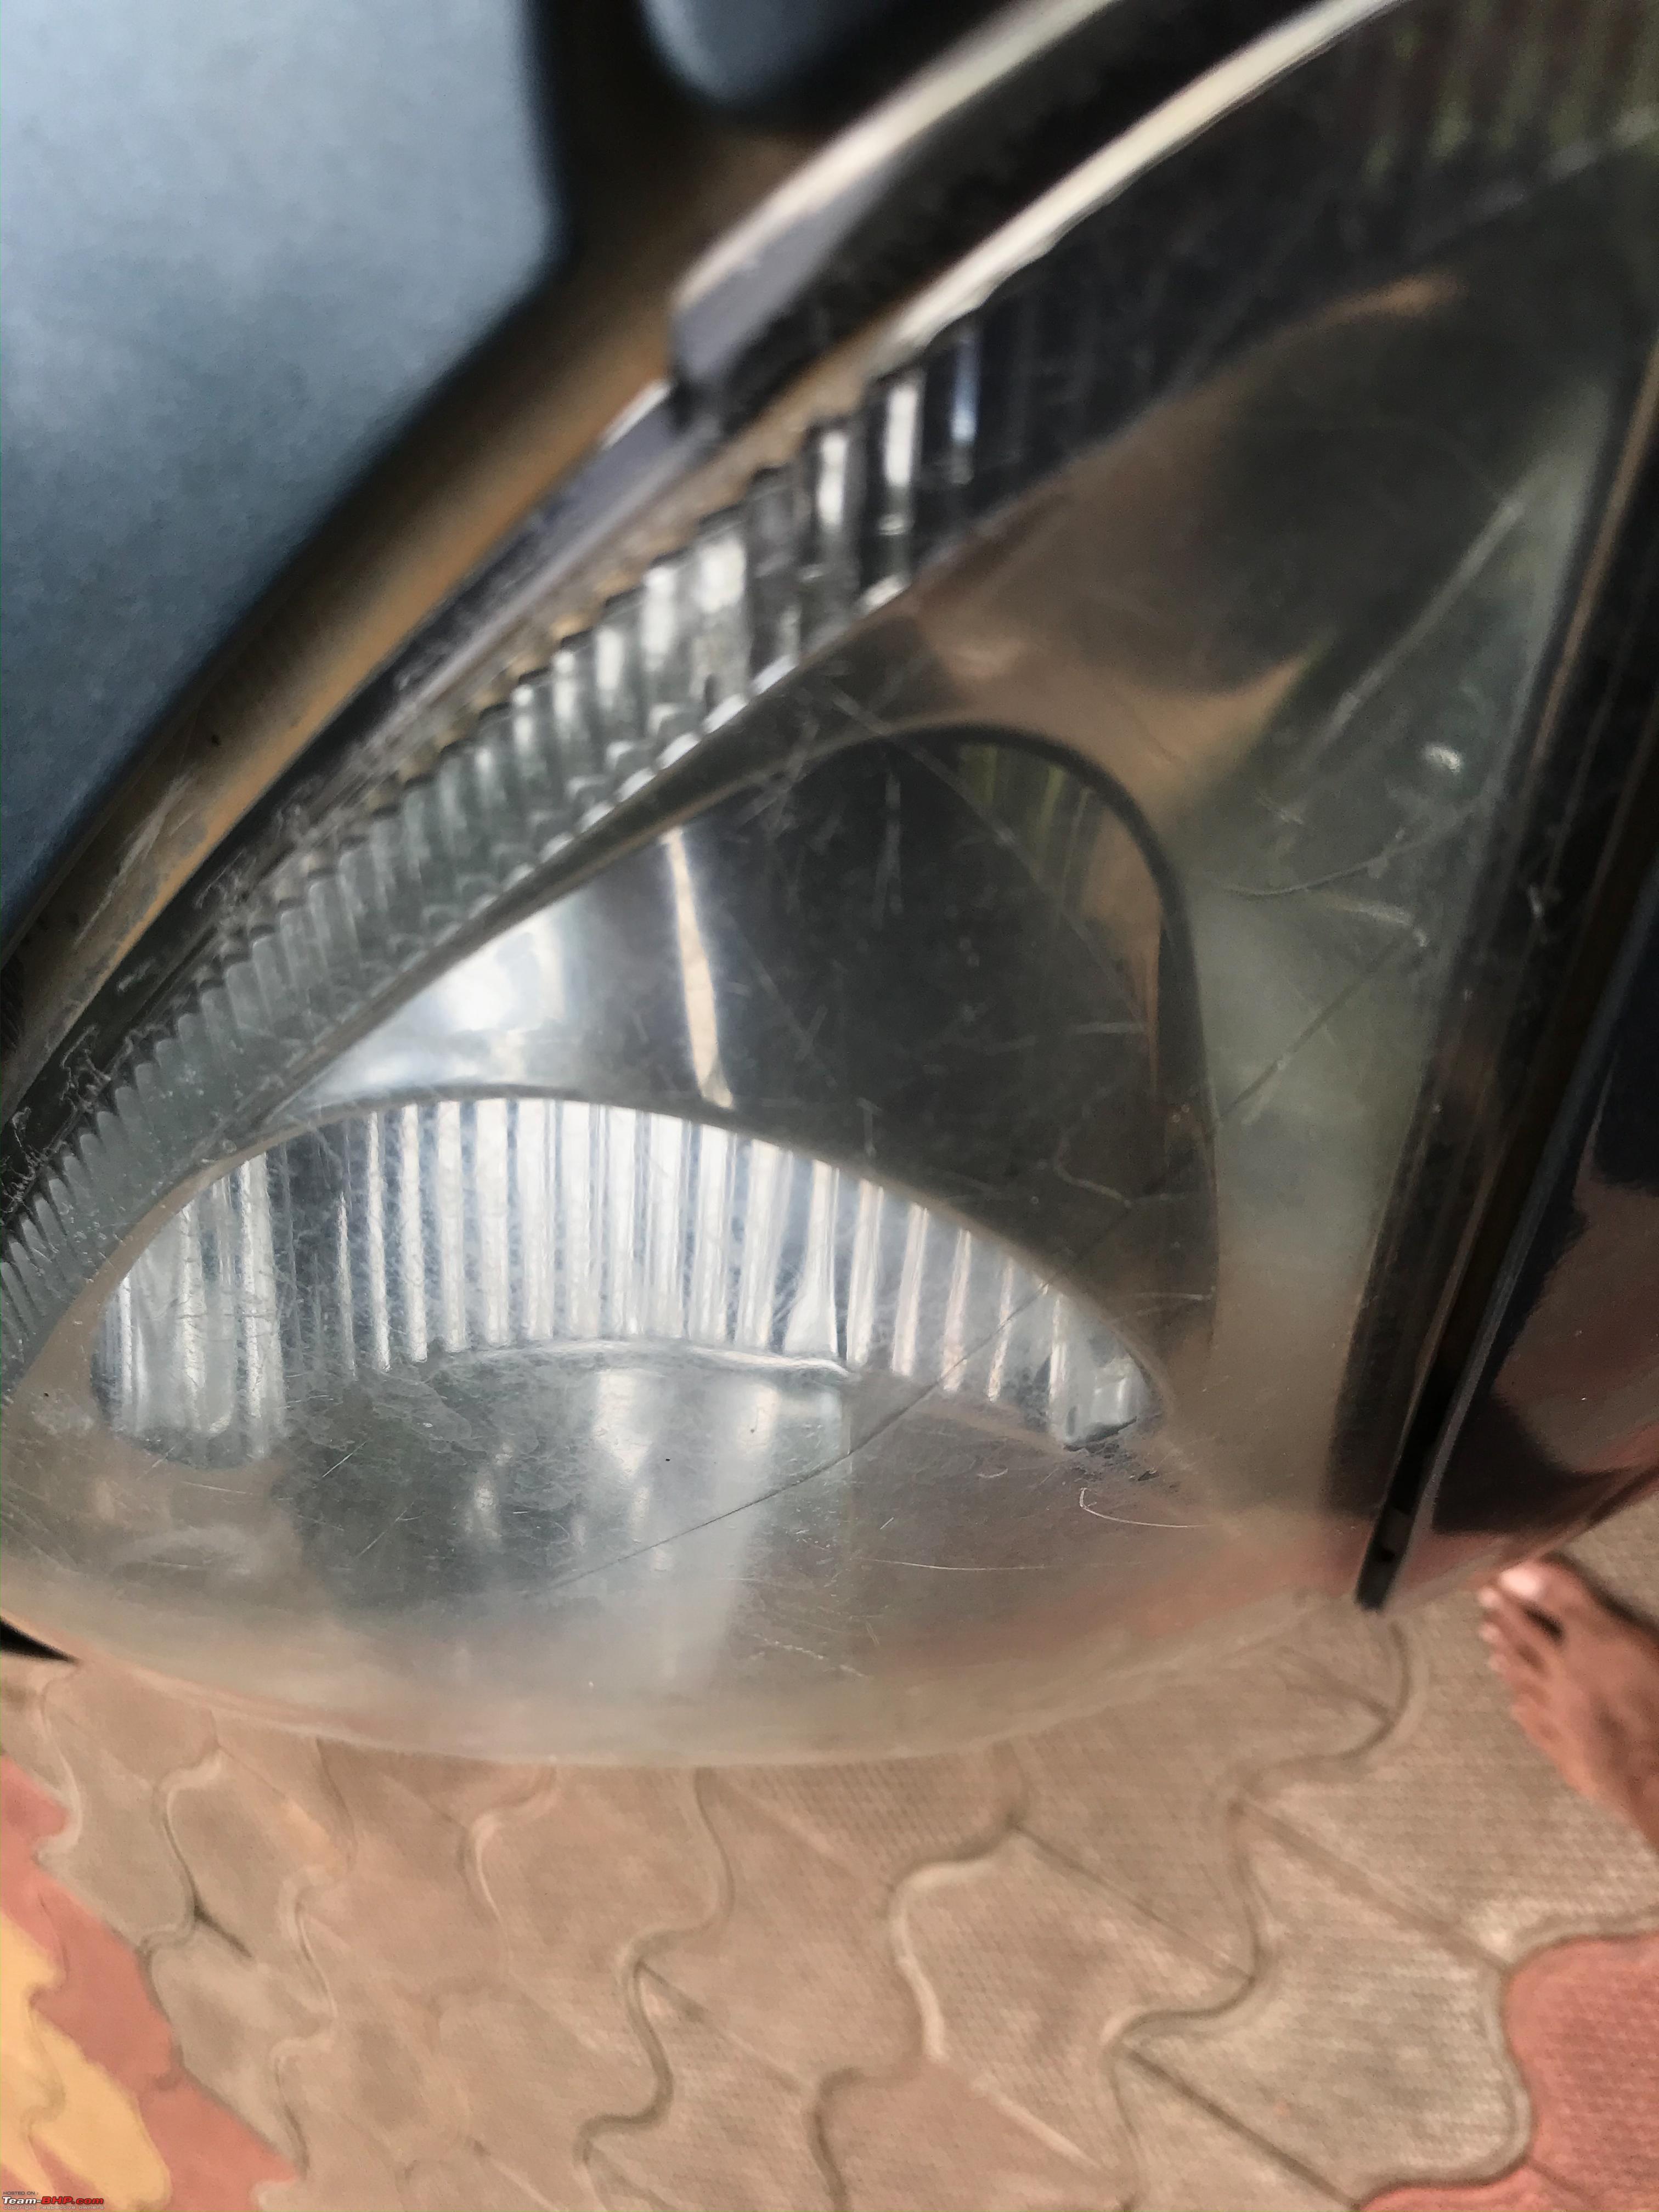 CAR HEADLIGHT CLEANING & POLISHING IN CHENNAI at best price in Chennai